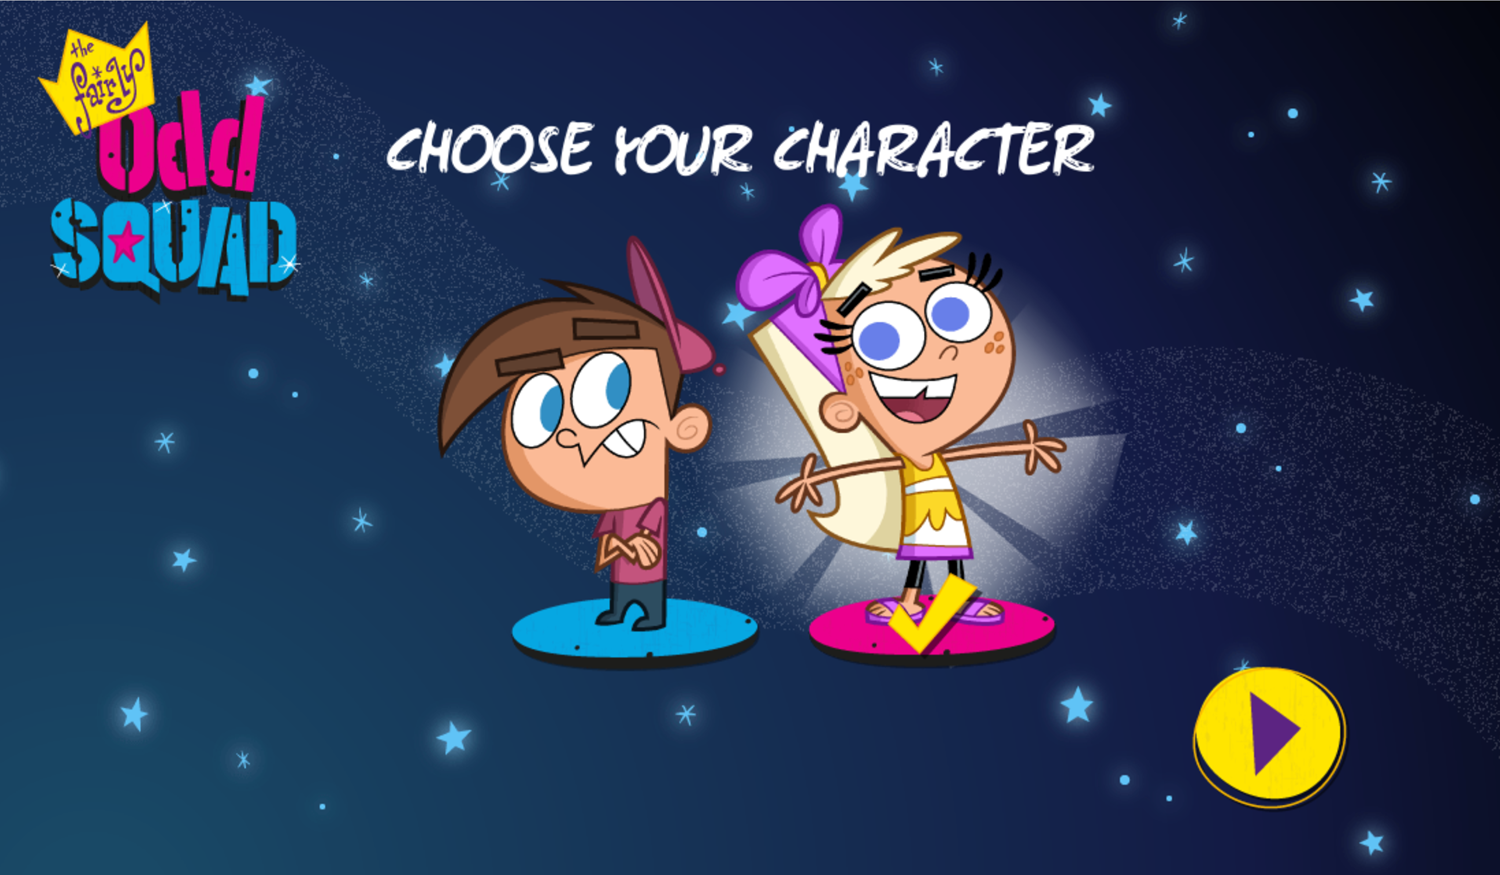 The Fairly OddParents The Fairly odd Squad Game Character Select Screen Screenshot.